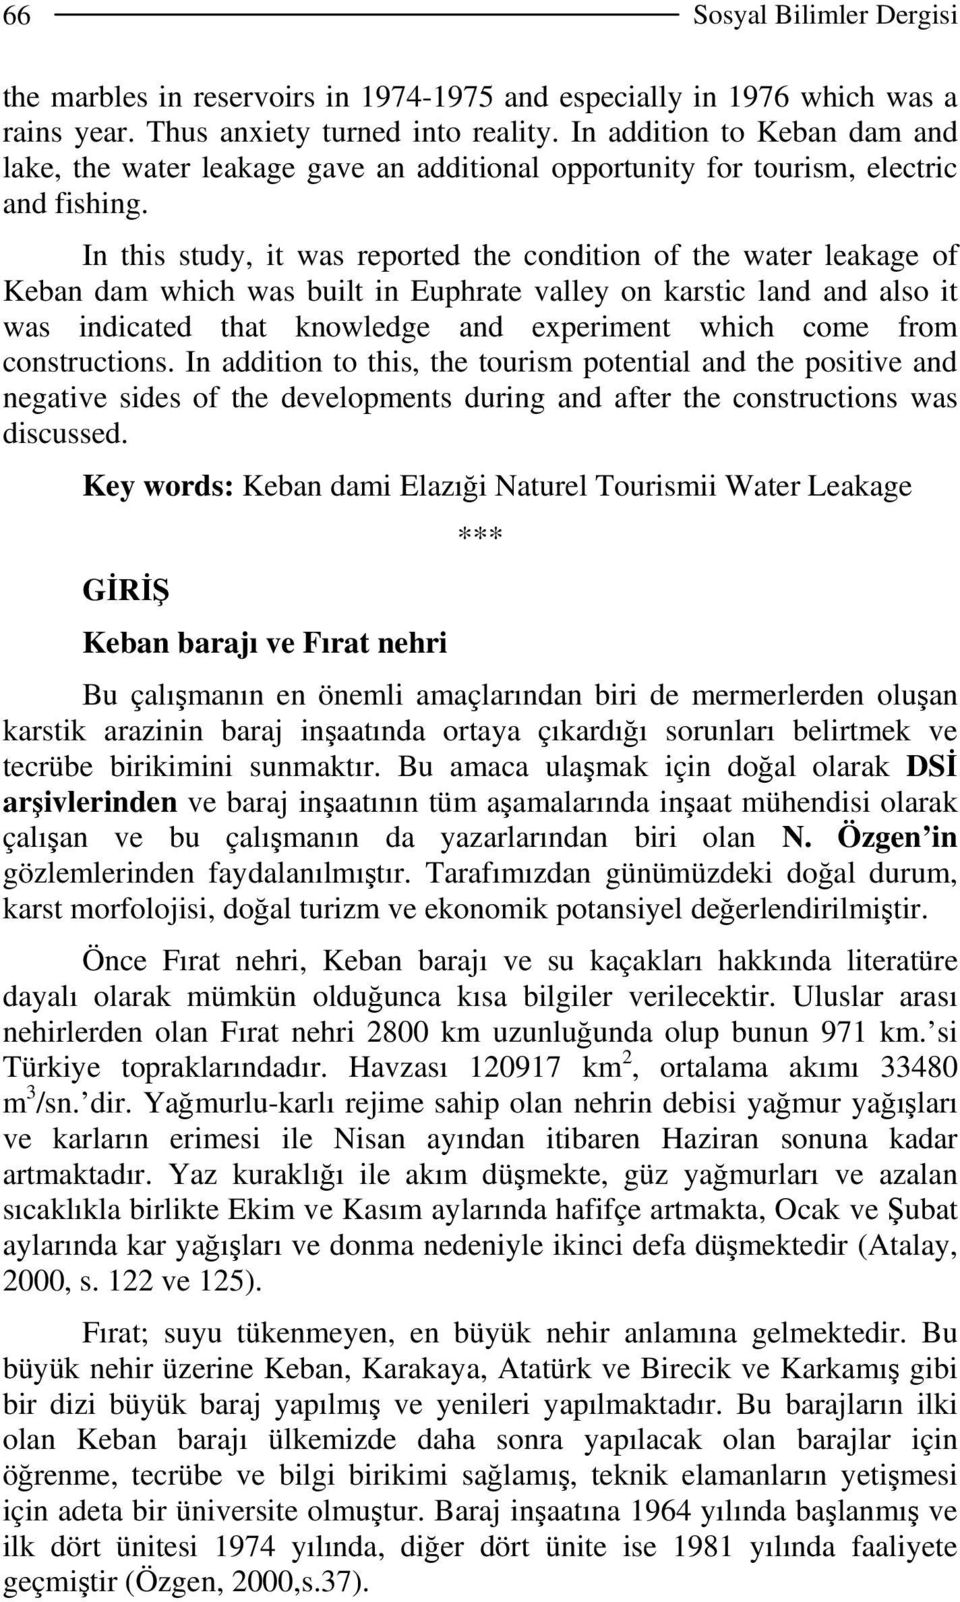 In this study, it was reported the condition of the water leakage of Keban dam which was built in Euphrate valley on karstic land and also it was indicated that knowledge and experiment which come